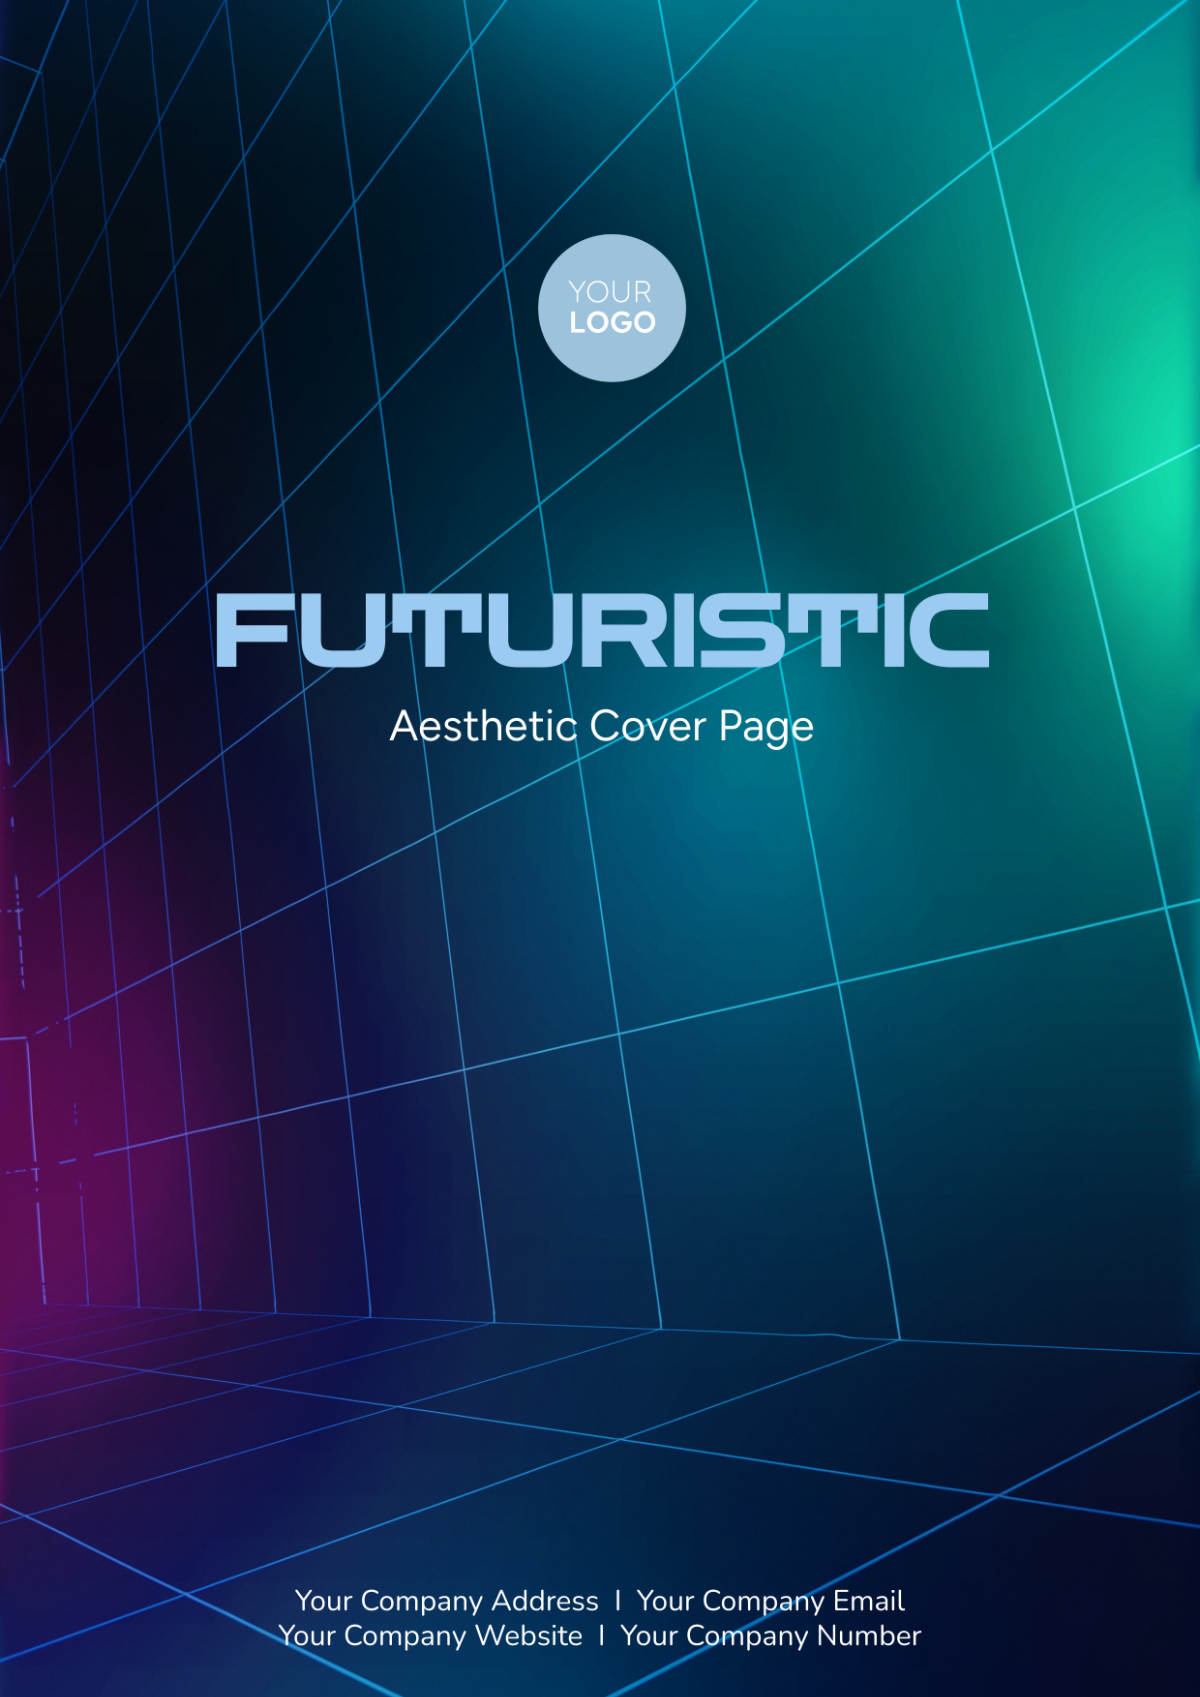 Futuristic Aesthetic Cover Page